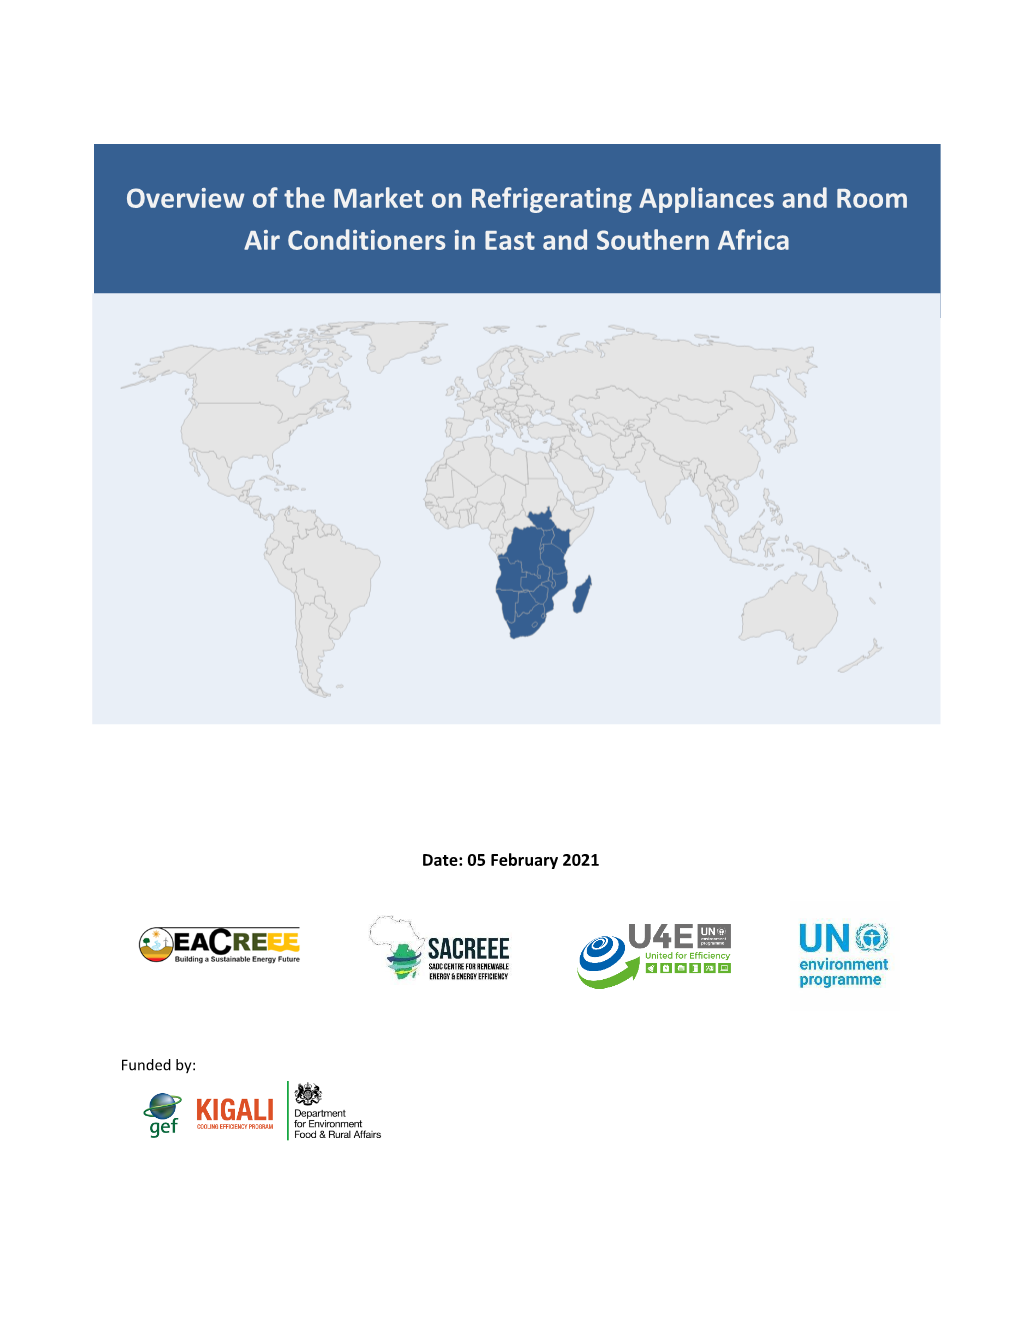 Overview of the Market on Refrigerating Appliances and Room Air Conditioners in East and Southern Africa